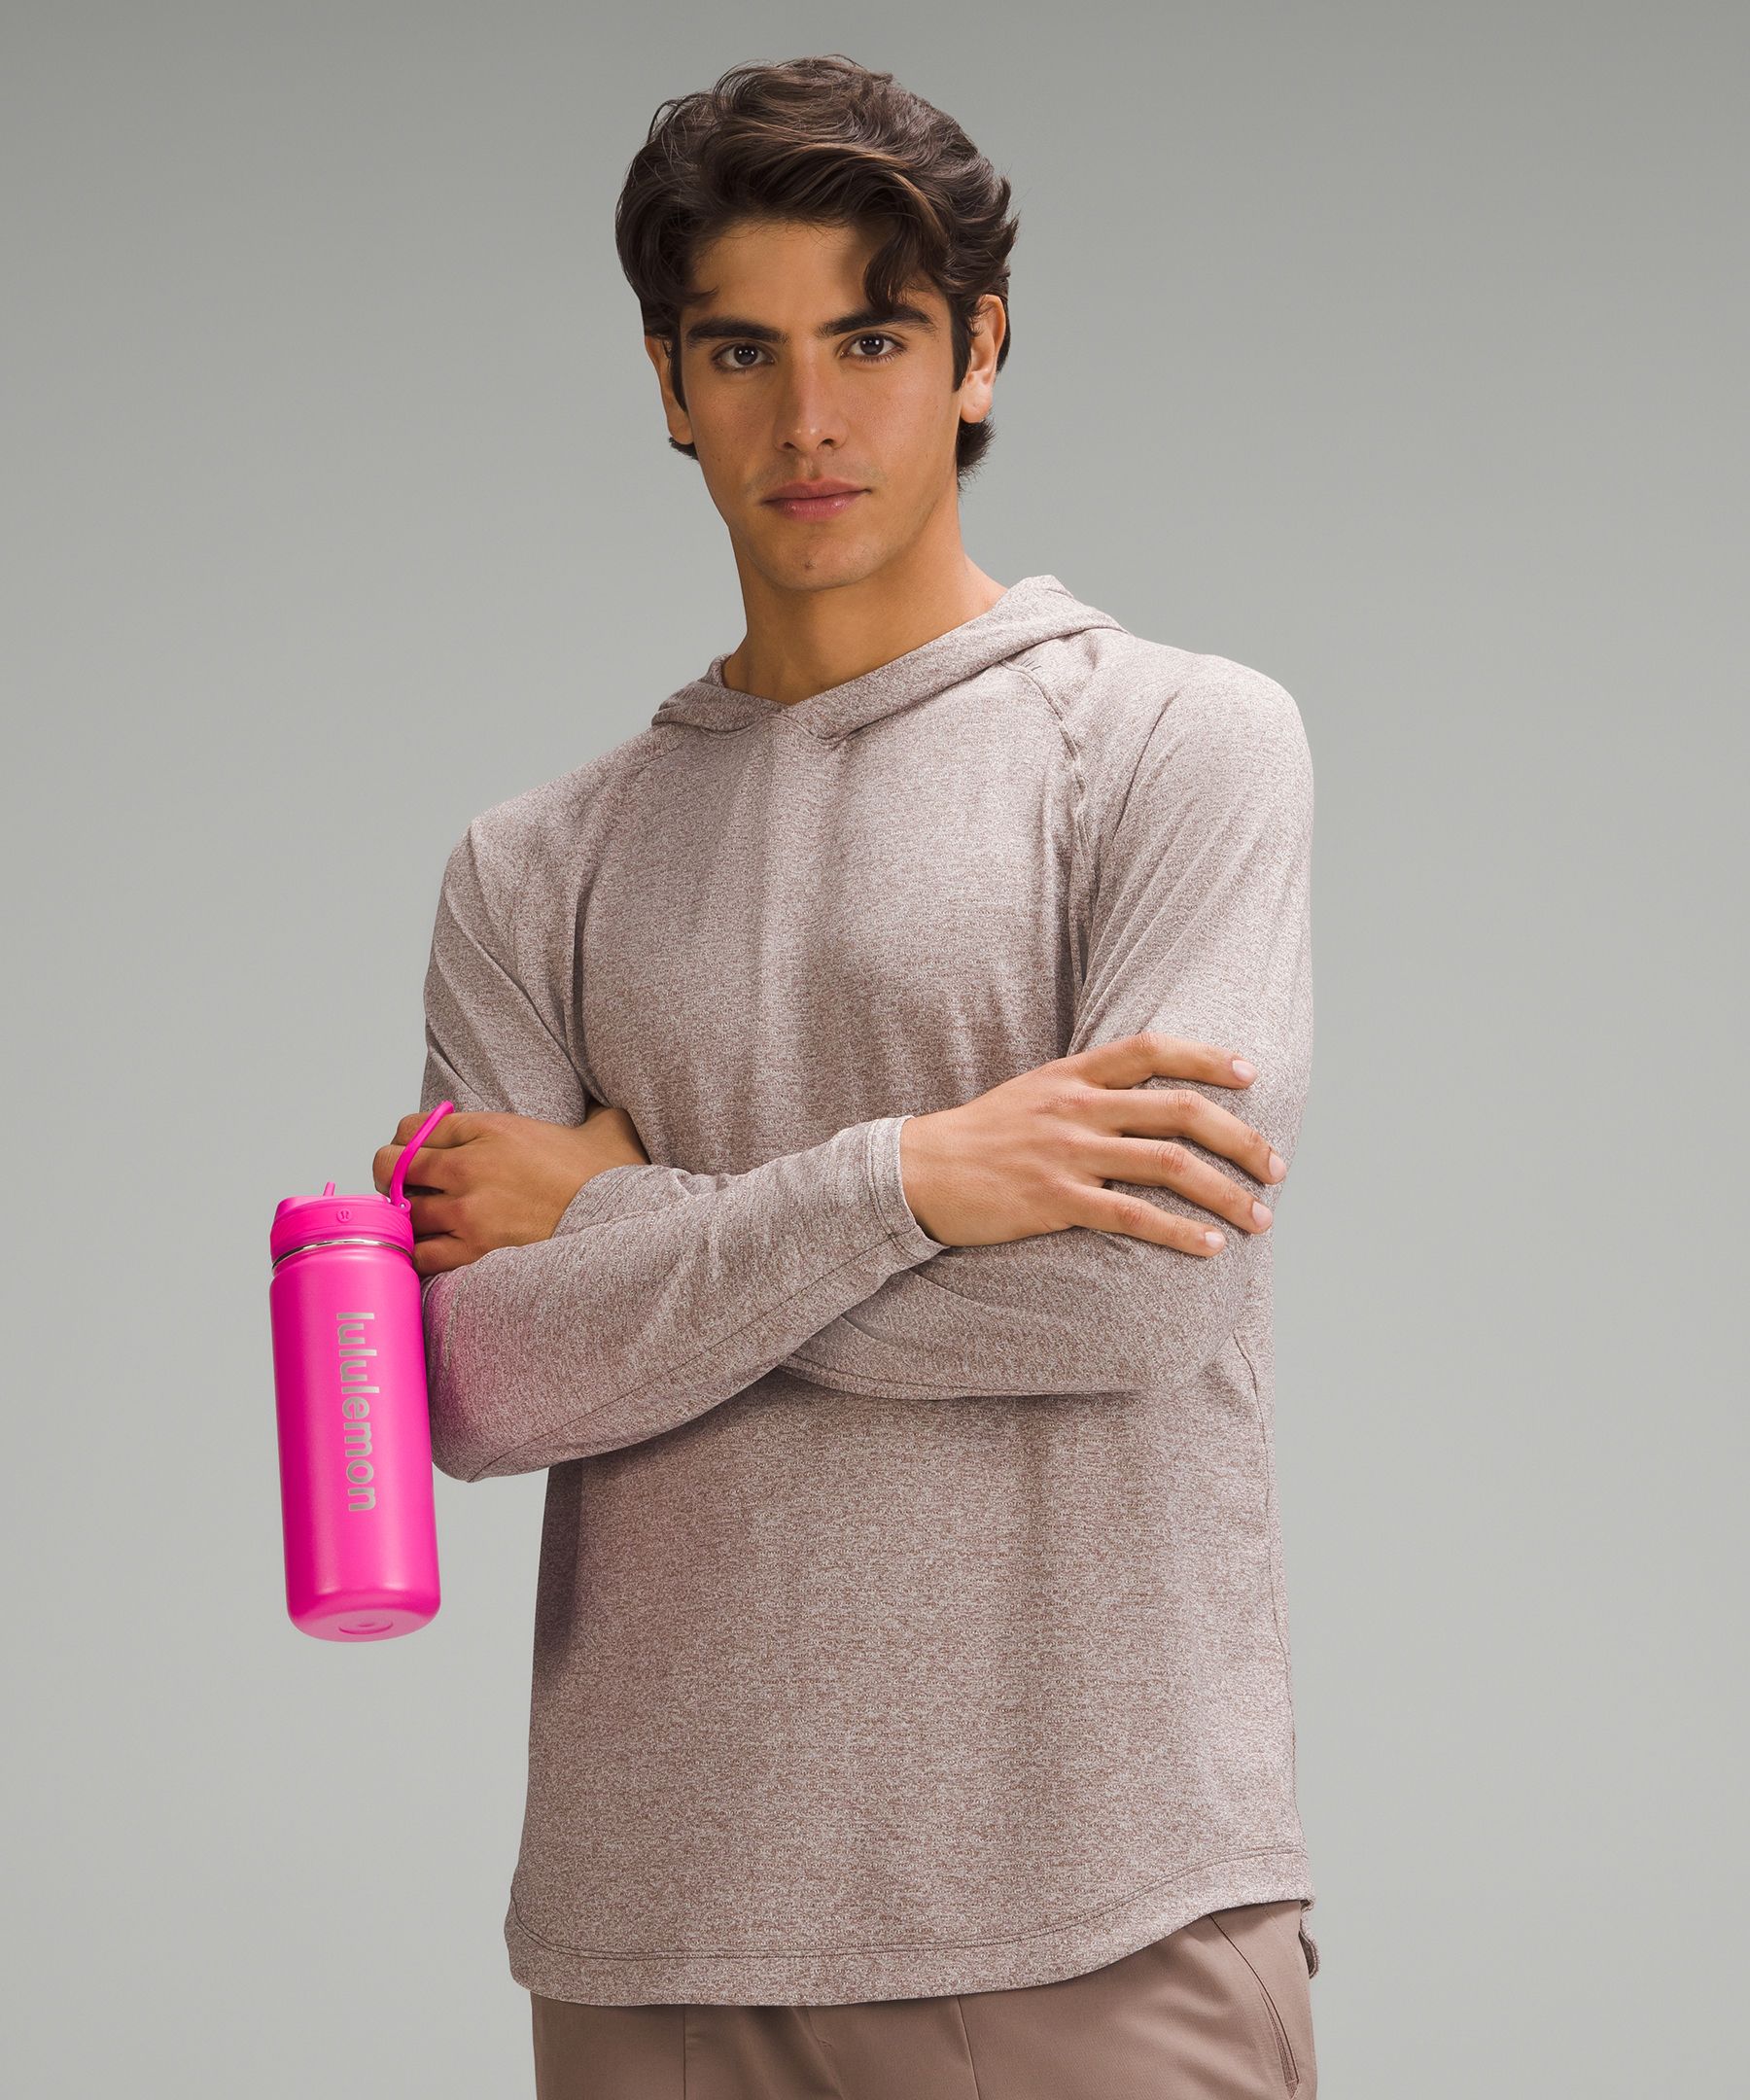 Back to Life Sport Bottle 24oz *Straw Lid, Unisex Work Out Accessories, lululemon